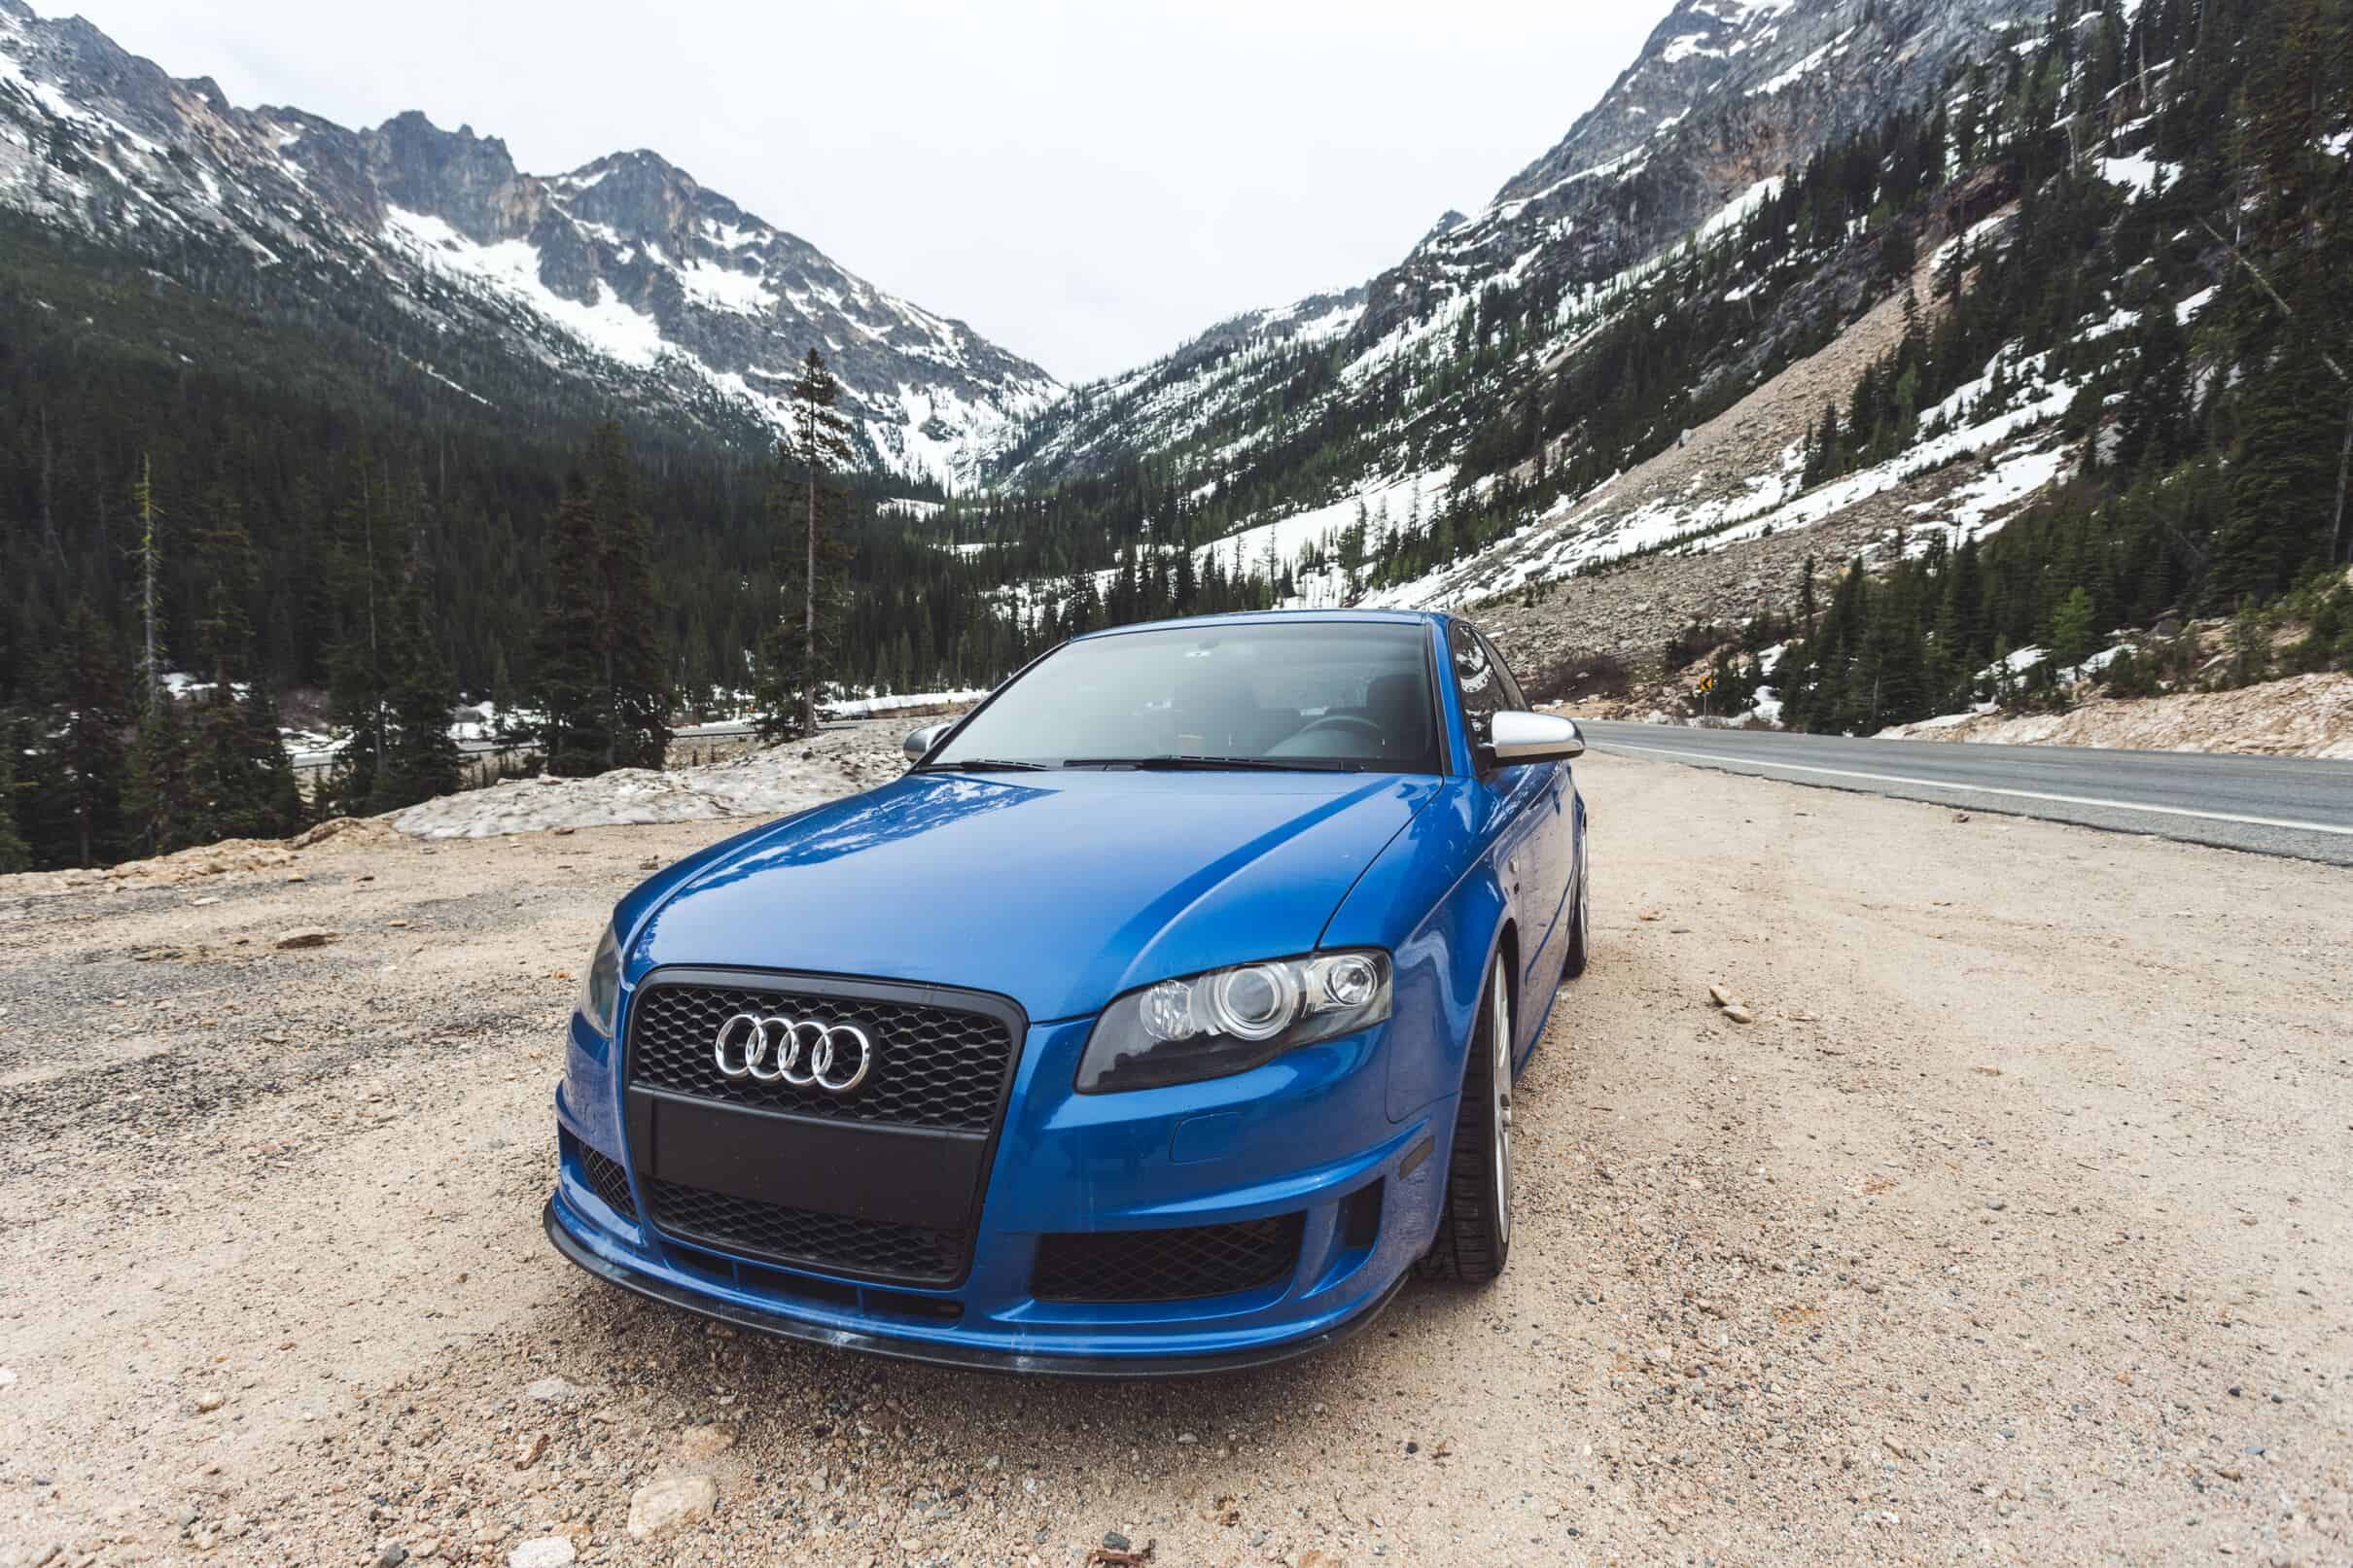 Blue Audi S4 - A sporty and elegant vehicle with a vibrant blue exterior.